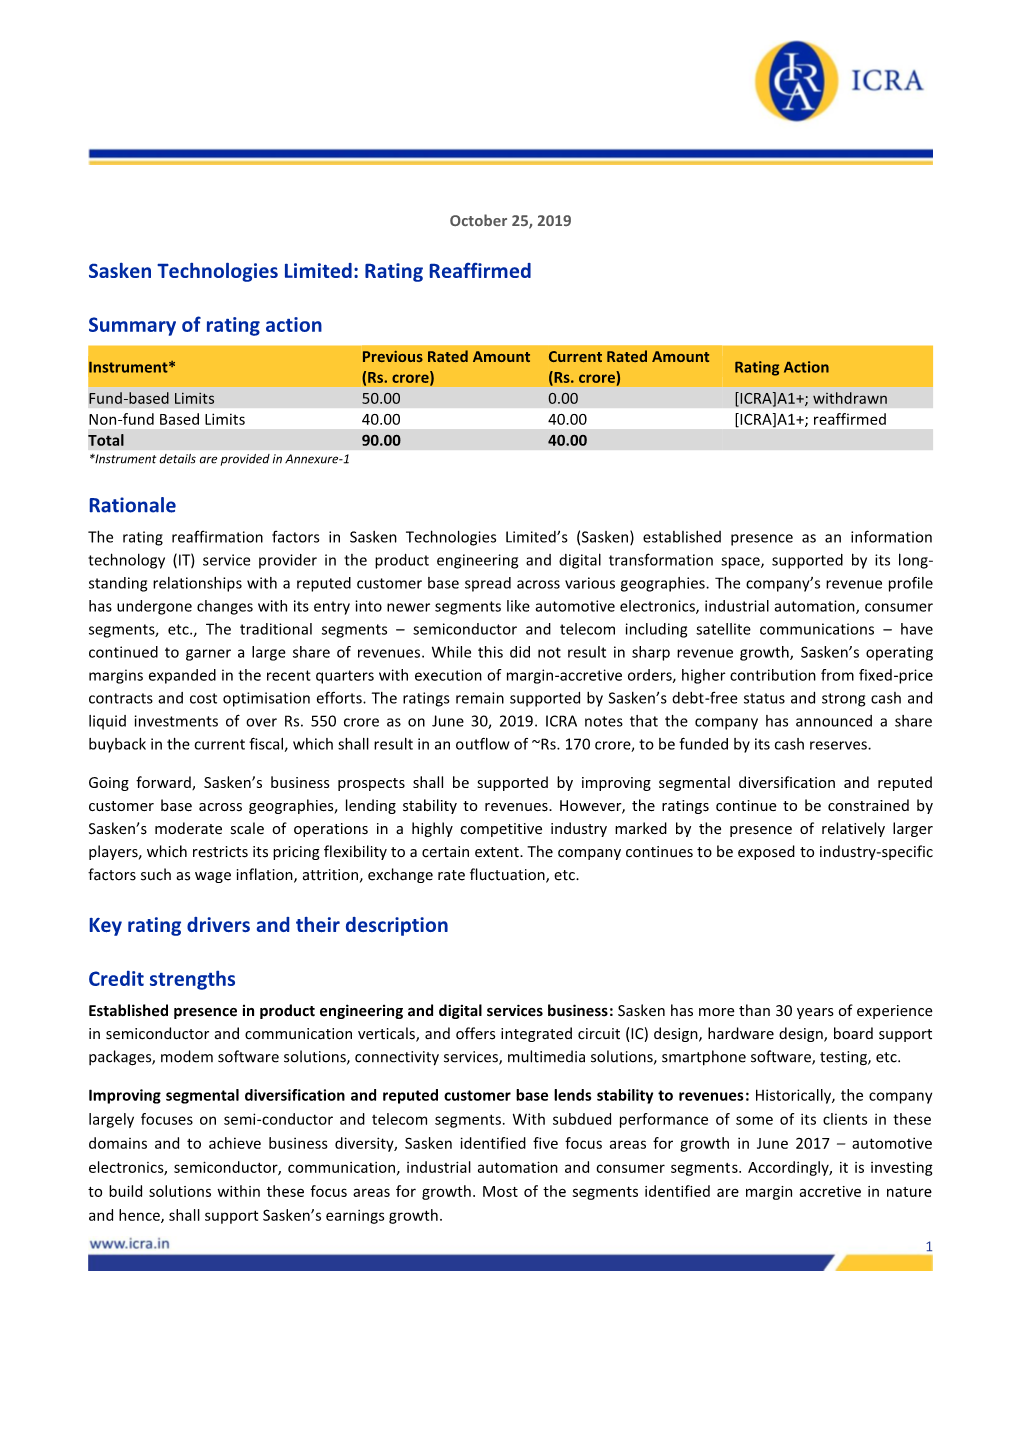 Sasken Technologies Limited: Rating Reaffirmed Summary of Rating Action Rationale Key Rating Drivers and Their Description